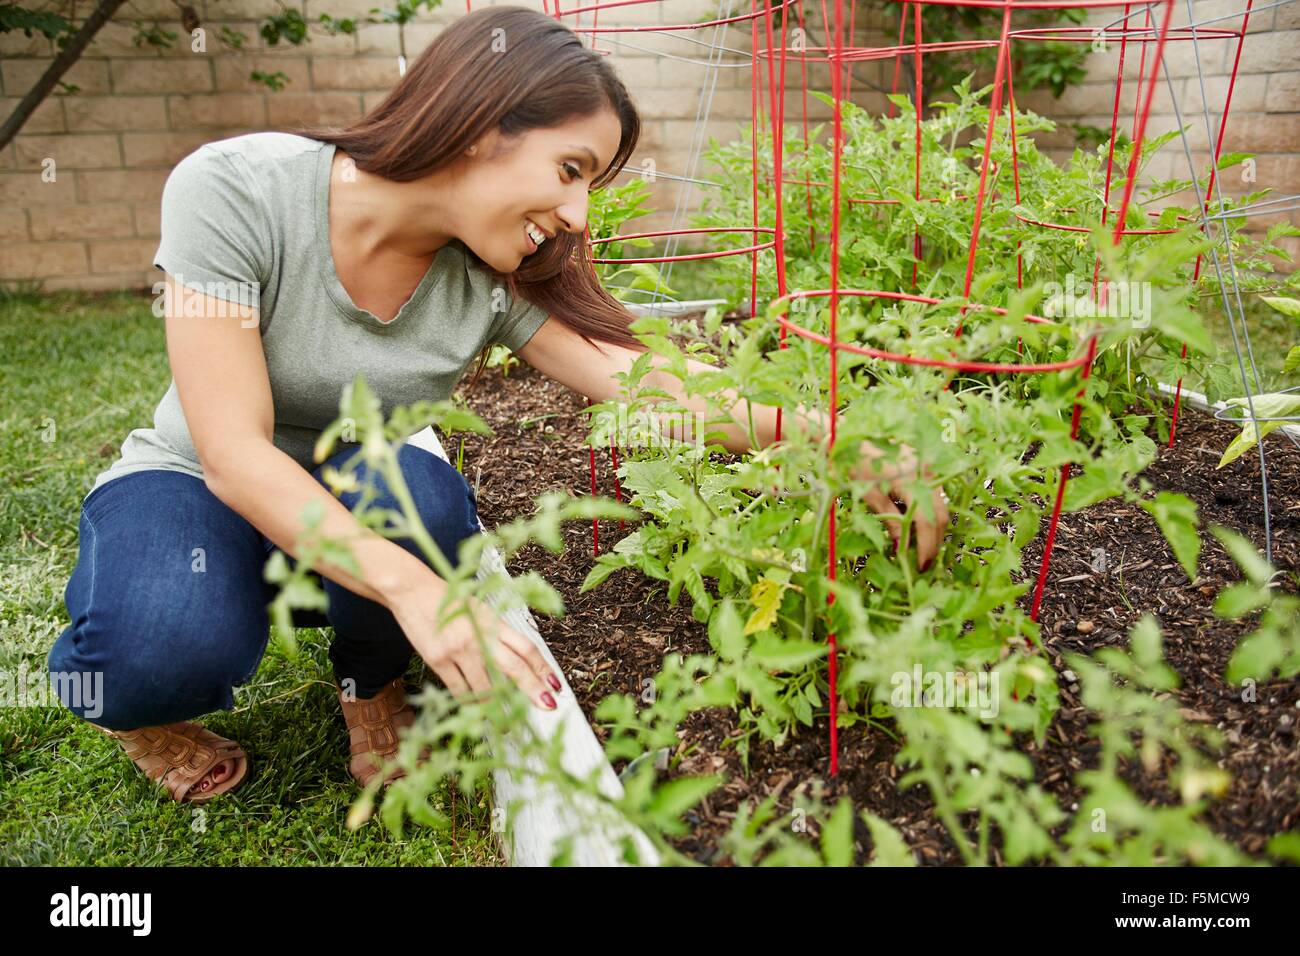 Woman working in garden bed Stock Photo